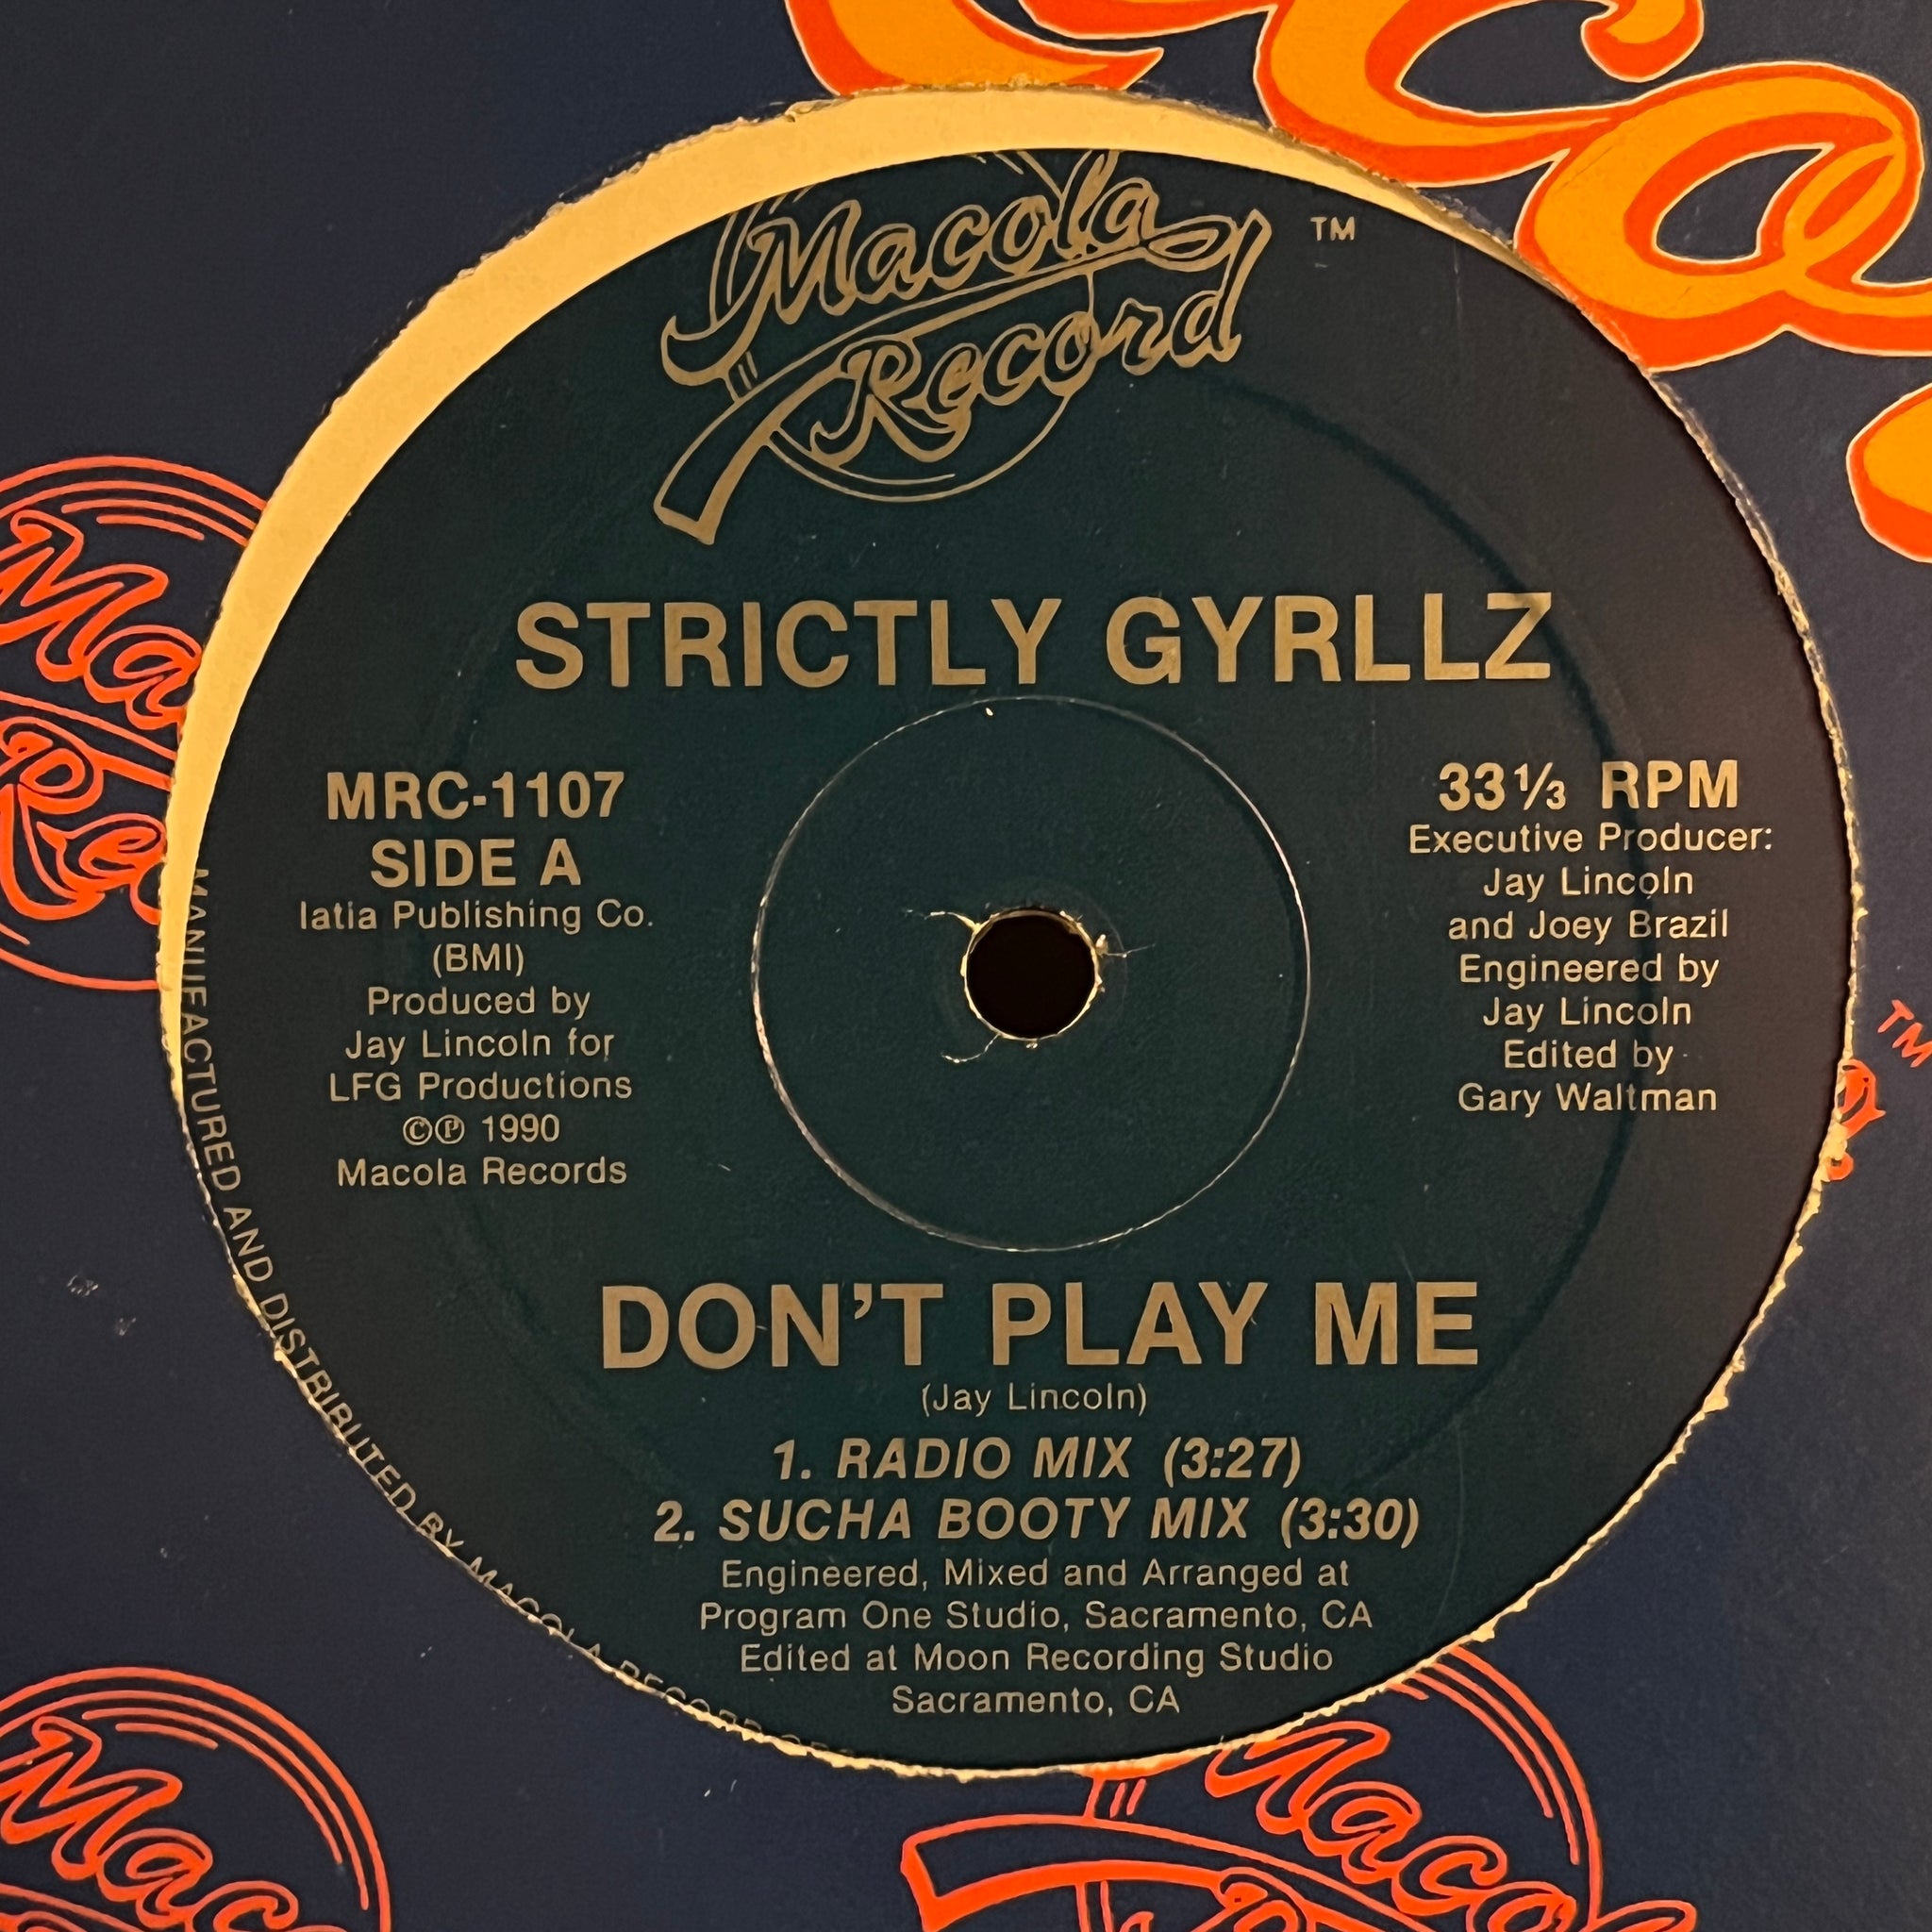 Strictly Gyrllz – Don't Play Me